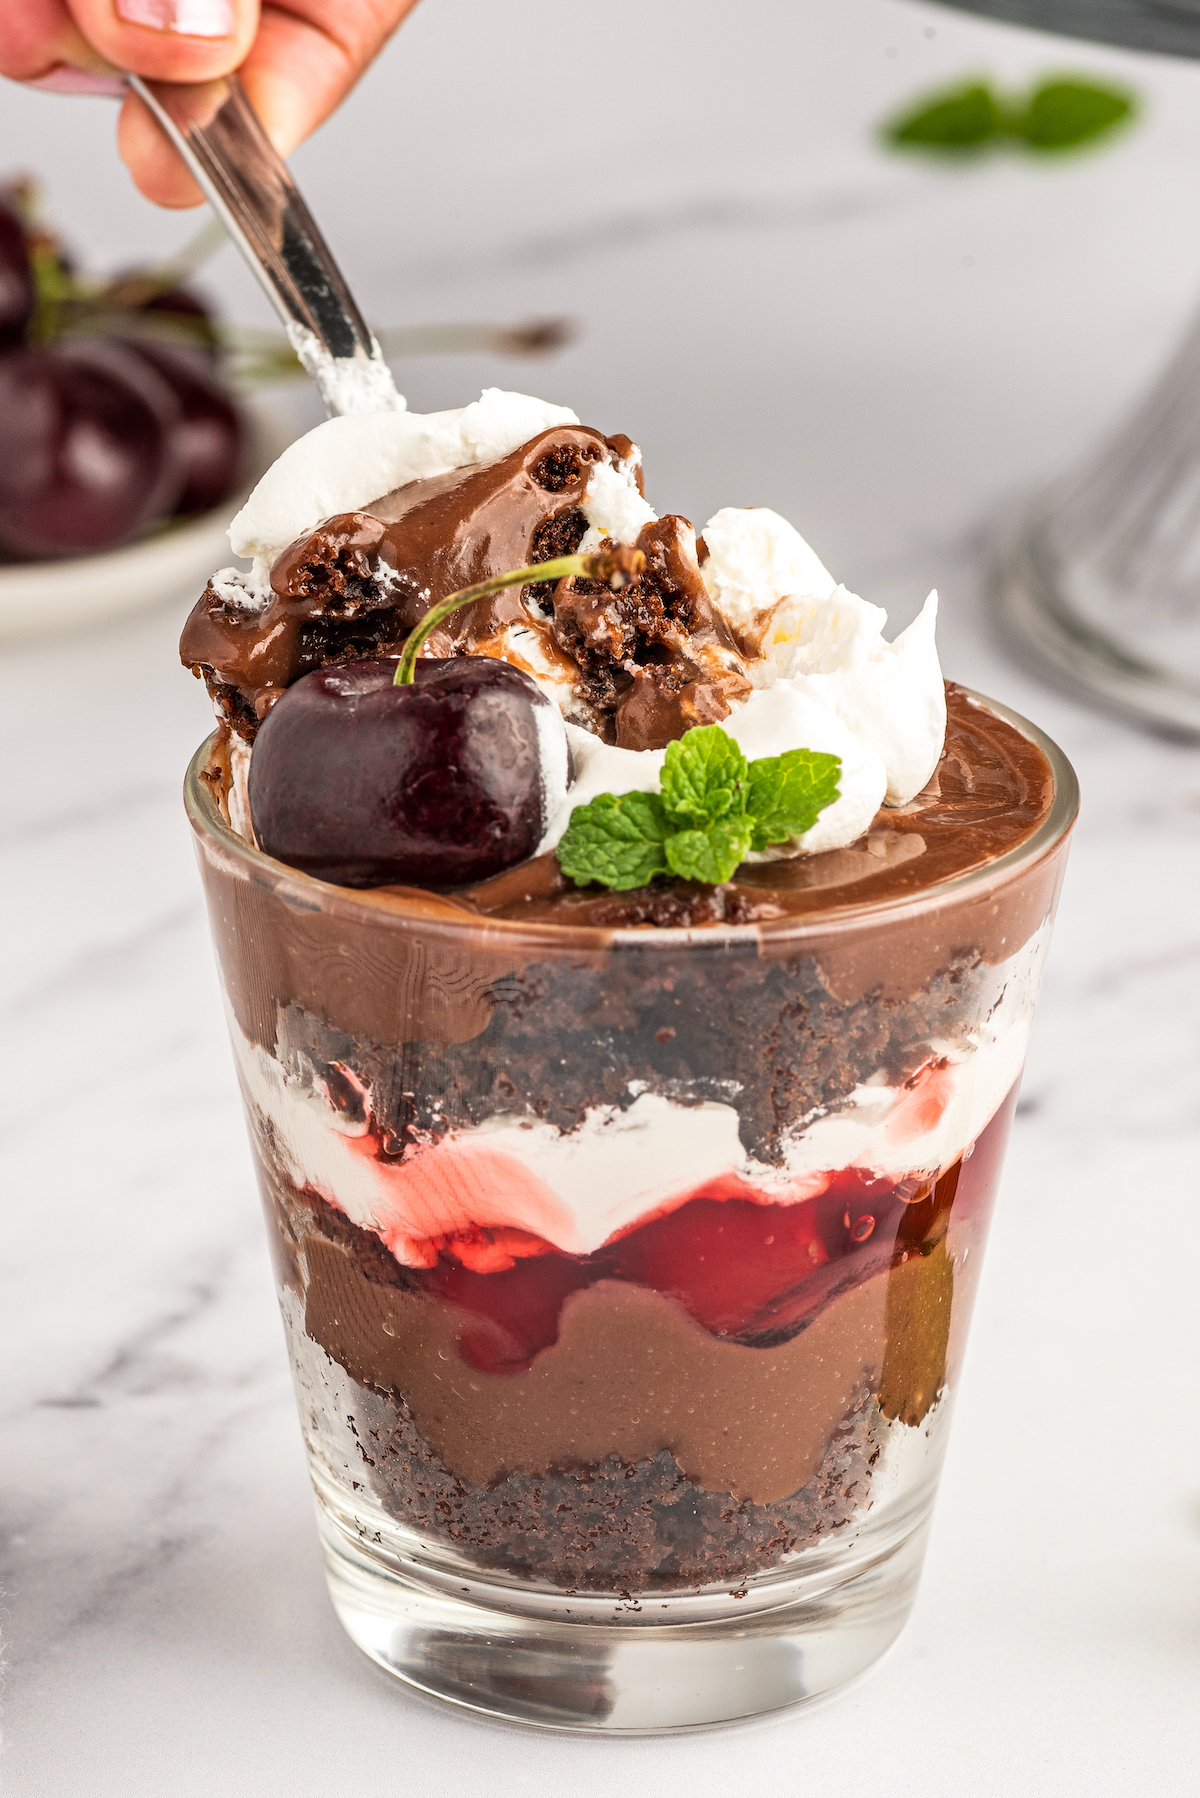 A single serving of black forest layered dessert.